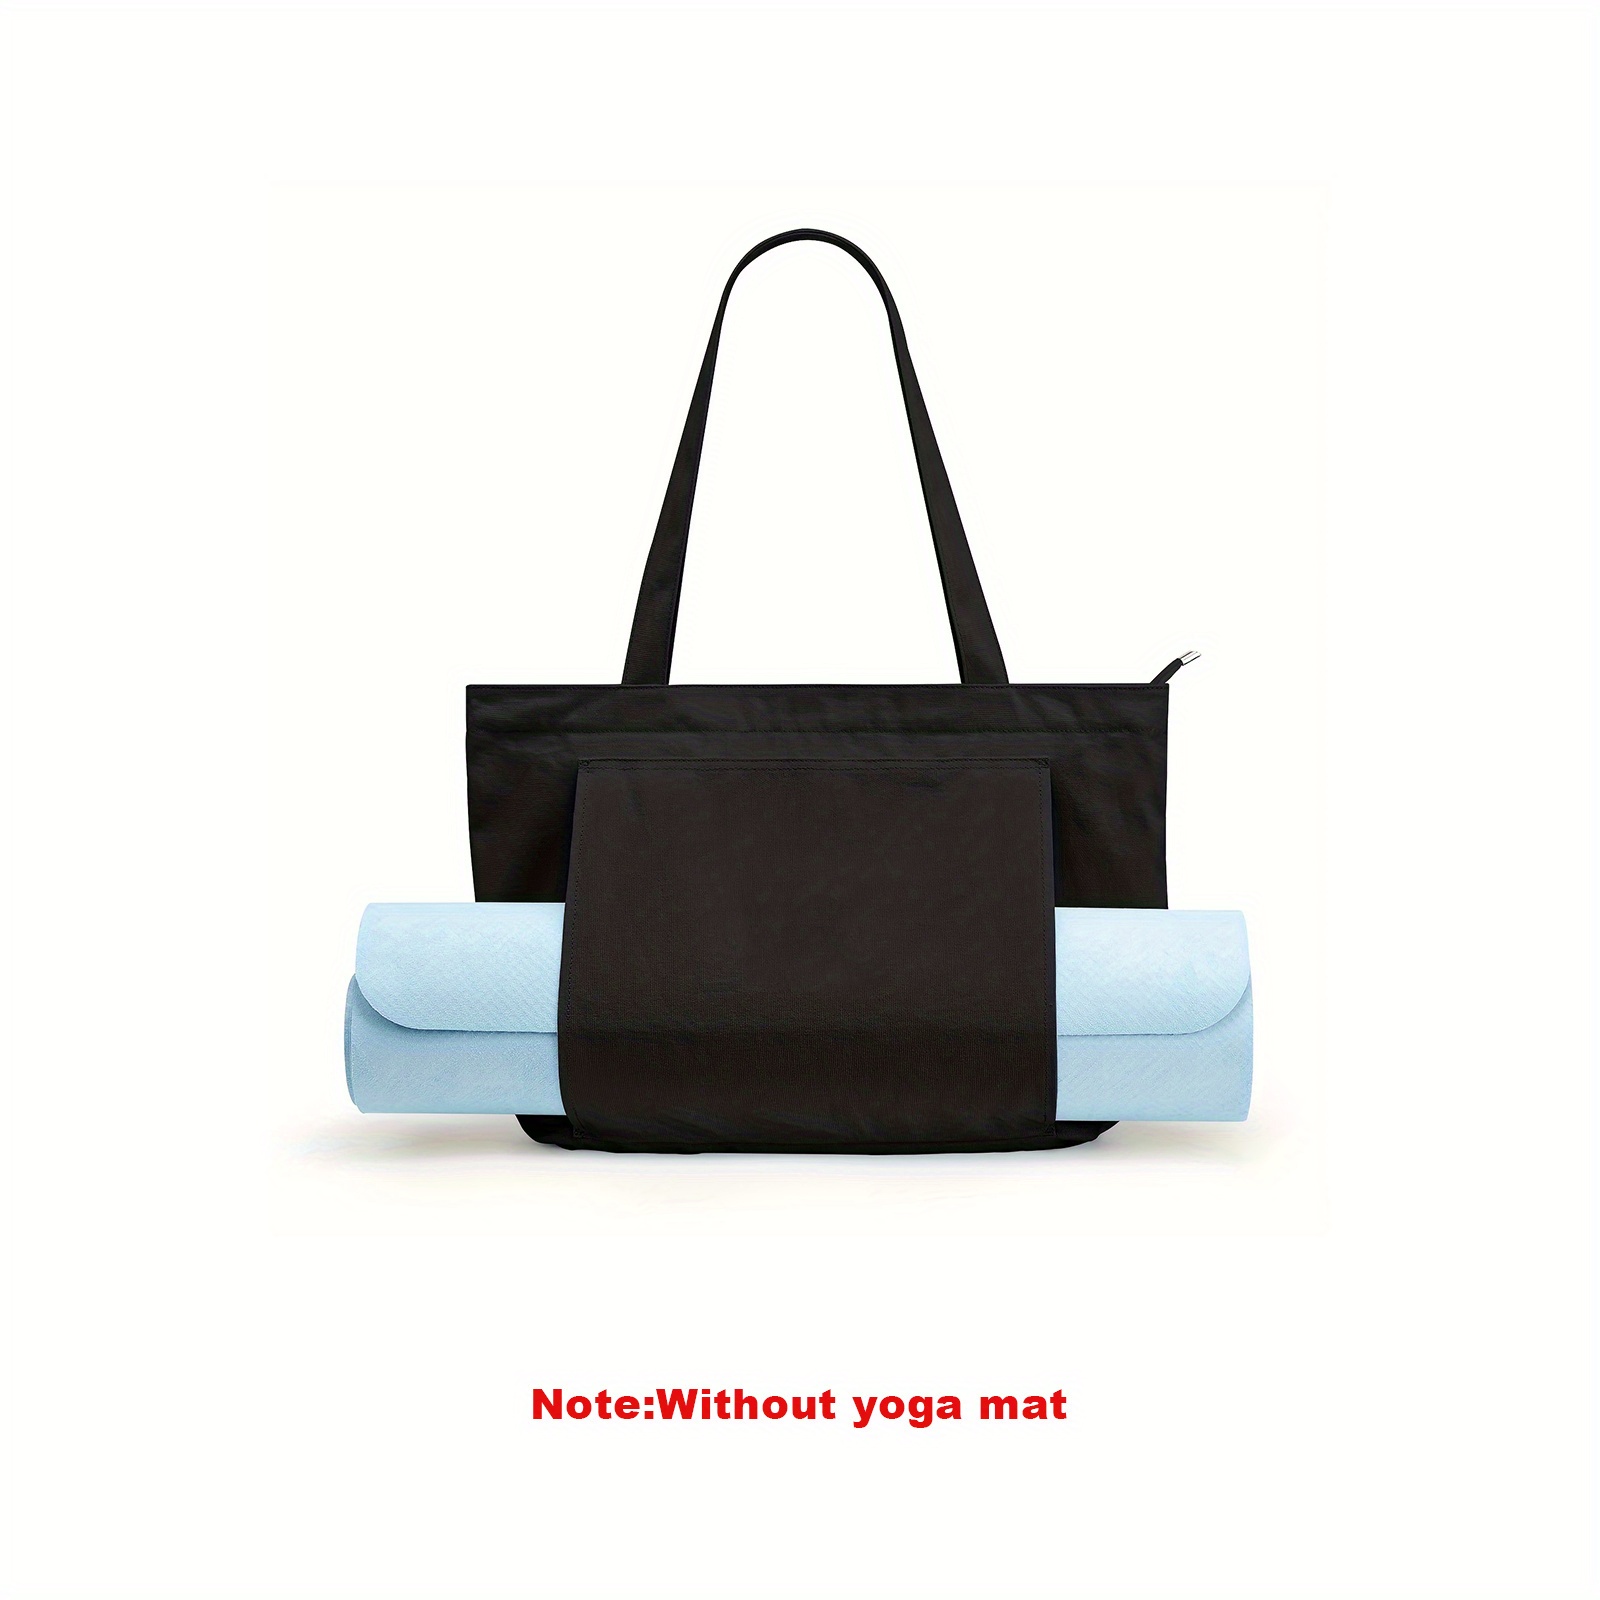 Yoga Bags for Women with Yoga Mats Bags Carrier Carryall Canvas Tote for  Pilates Shoulder for Travel Office Beach Workout